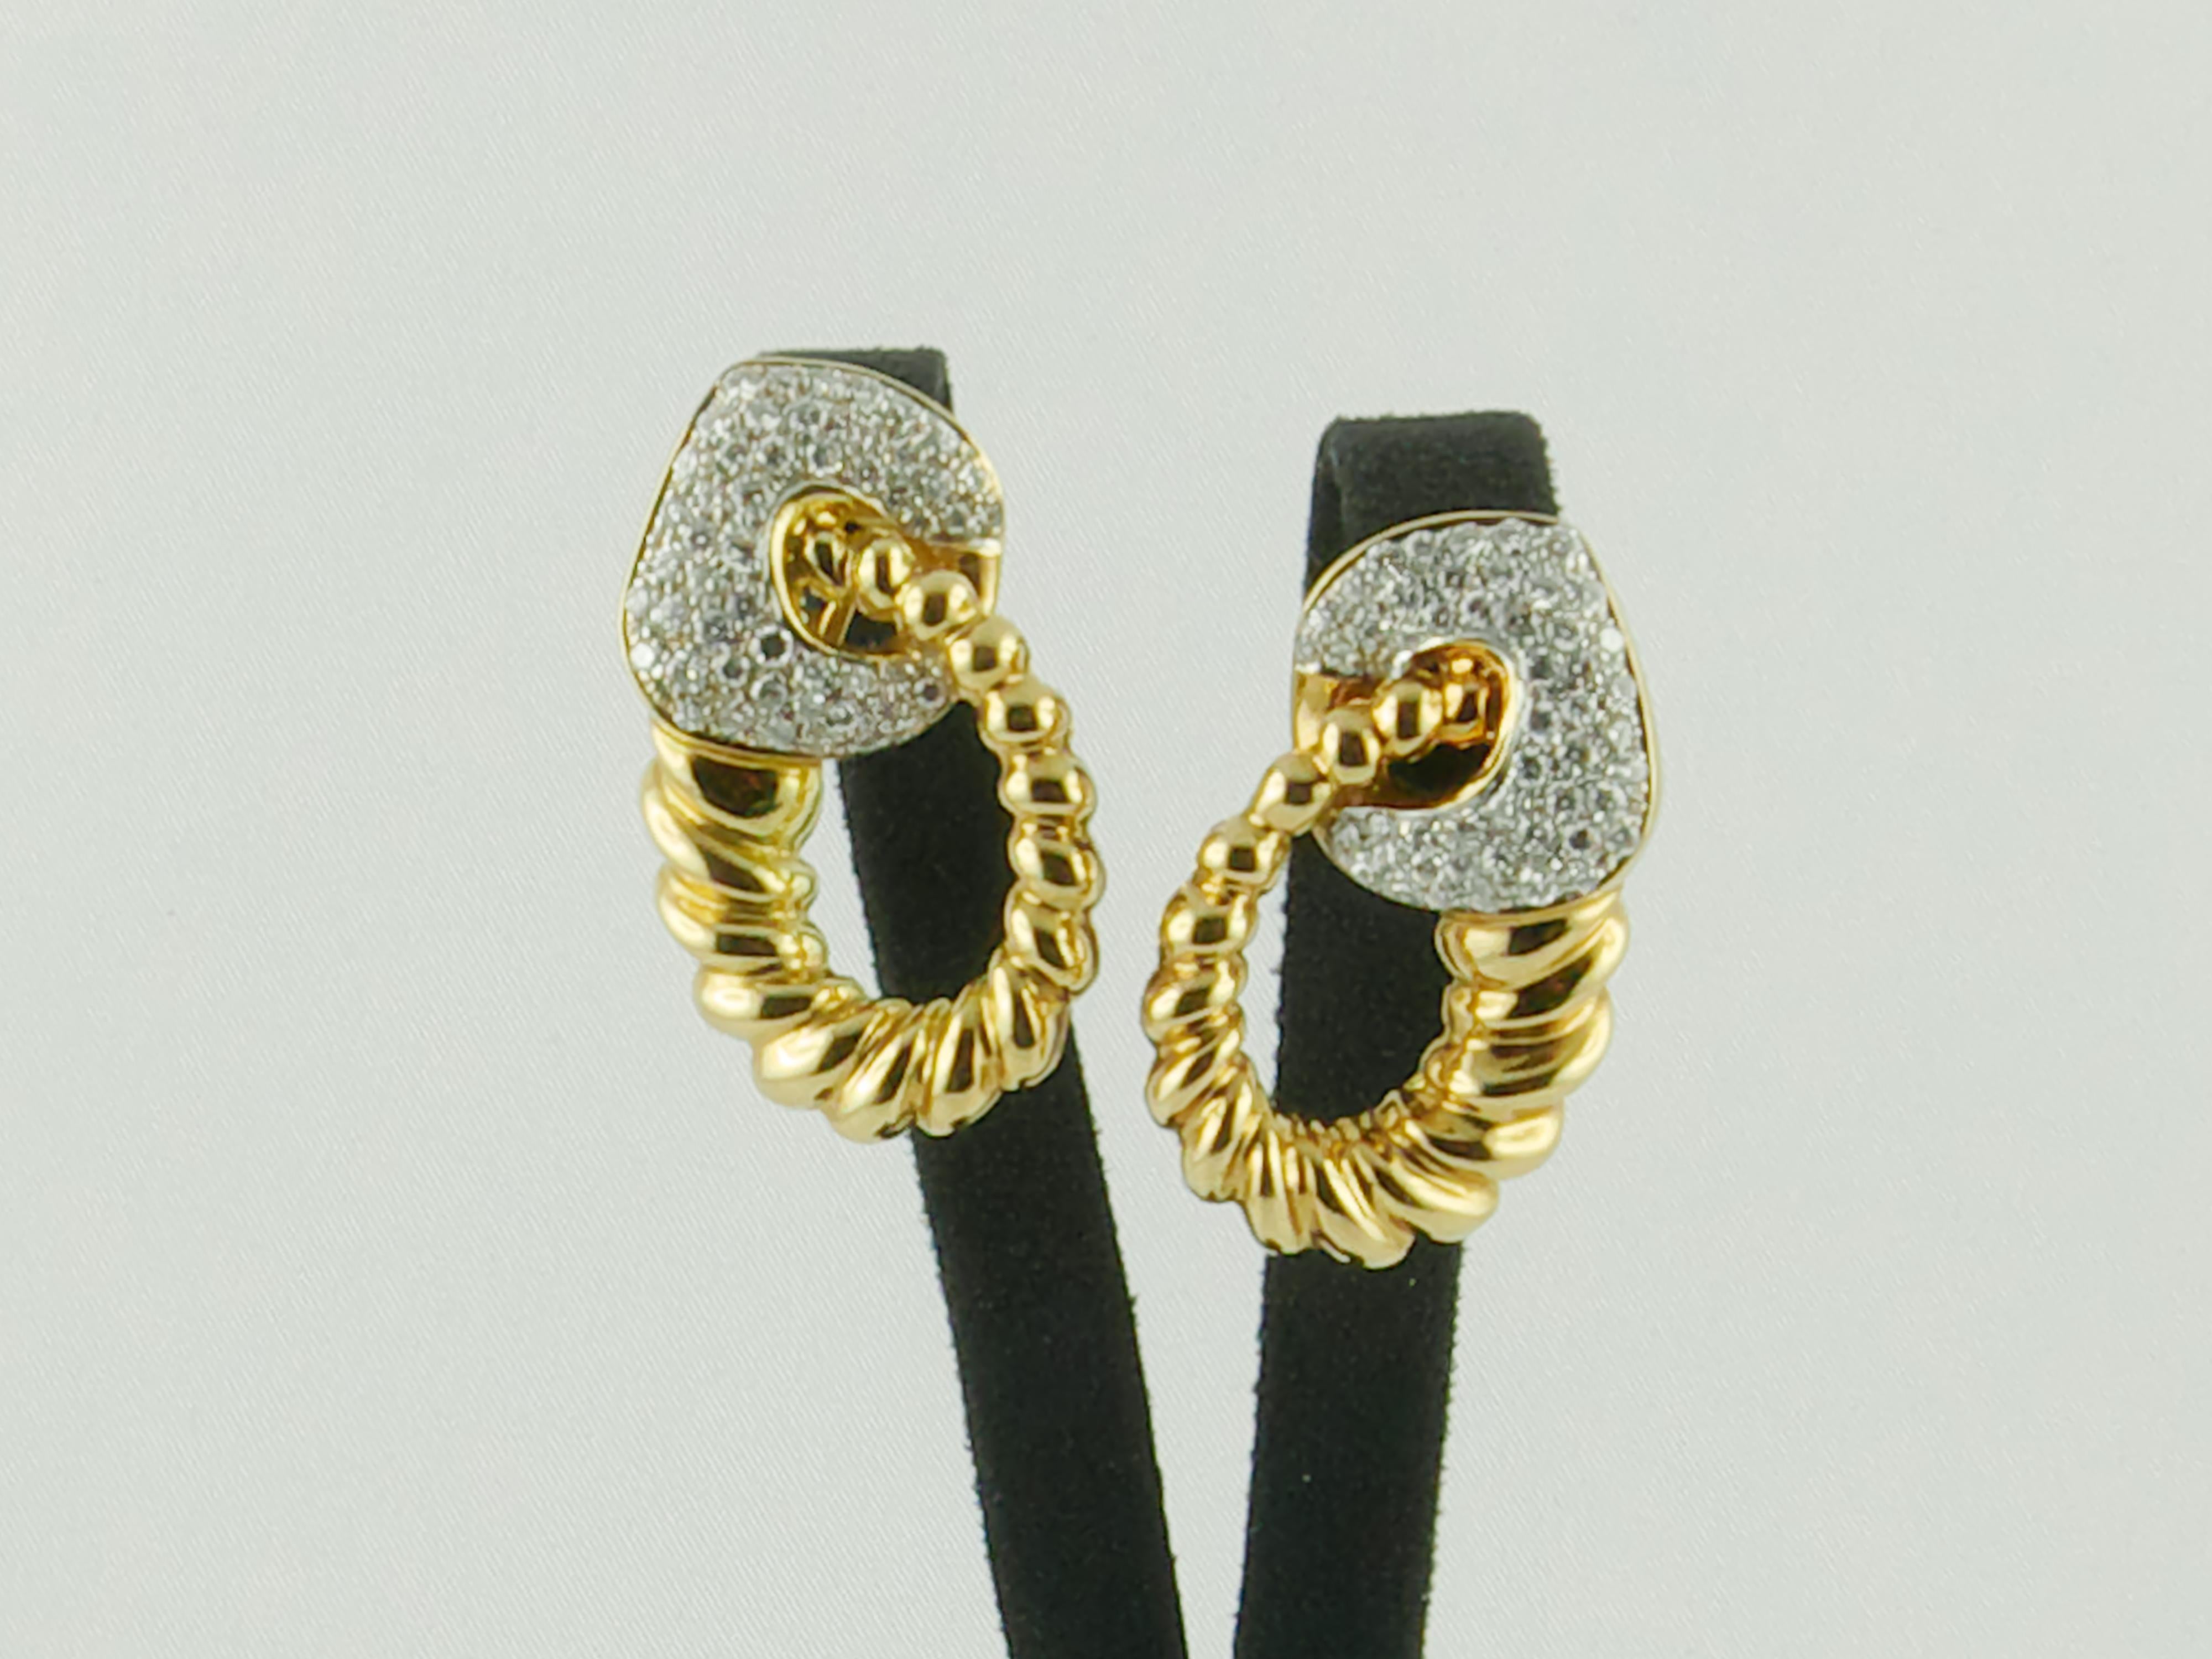 Pair of elegant 1980s  clip-on earrings finely crafted in Italy  in 18K Yellow and White Gold with a Graduating Fluted swirl design  